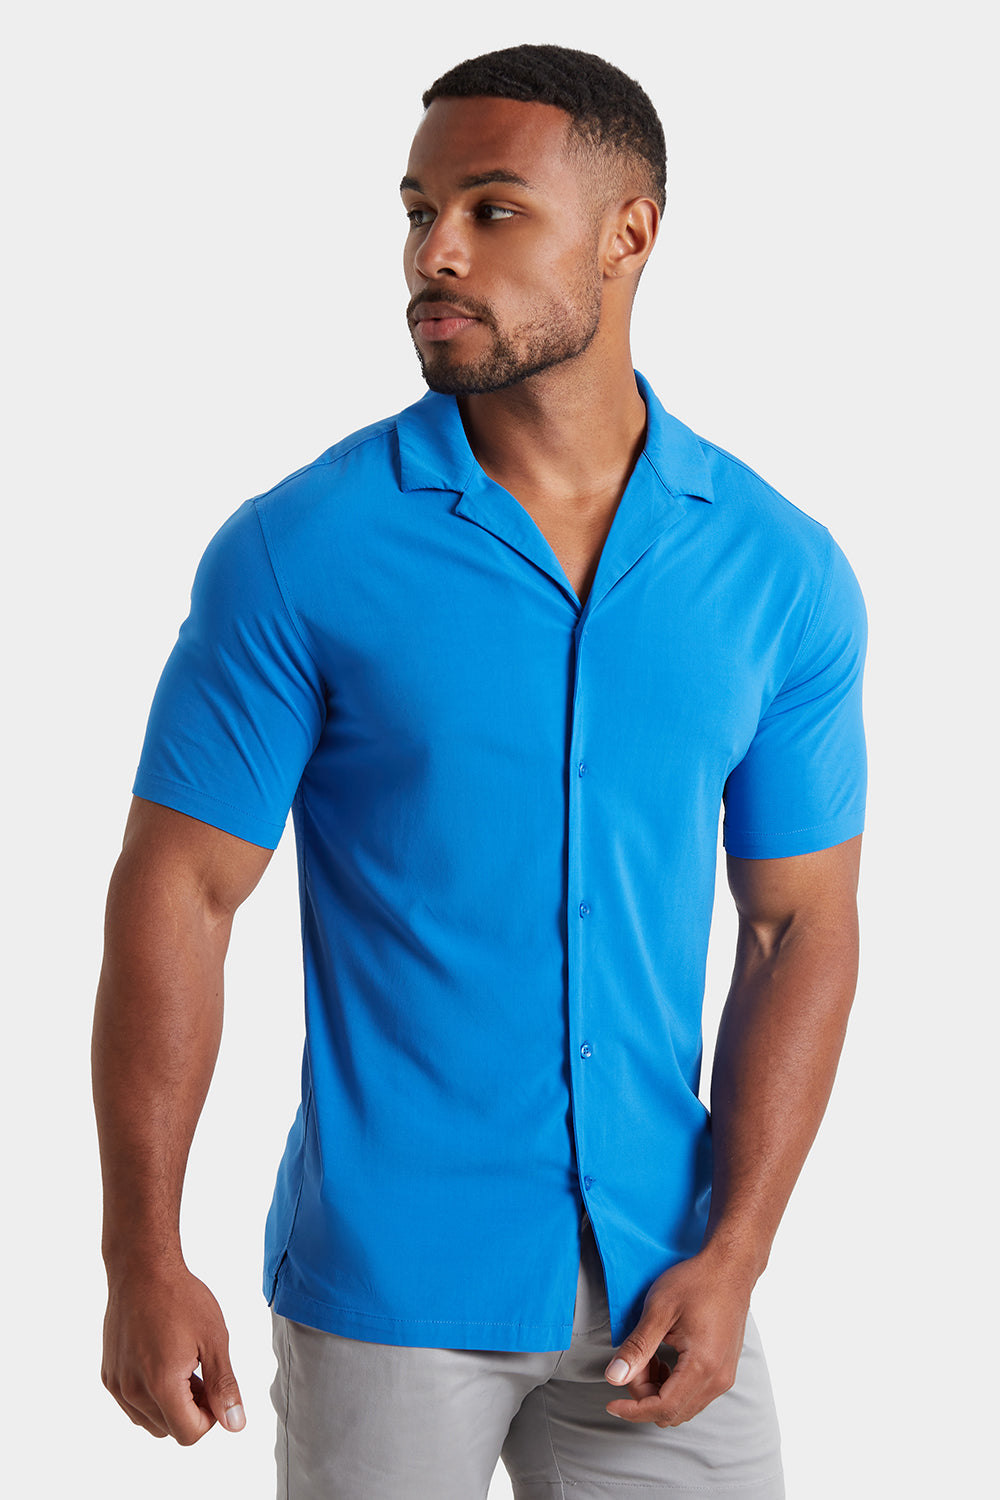 Muscle Fit Short Sleeve Viscose Shirt in Electric - TAILORED ATHLETE - ROW